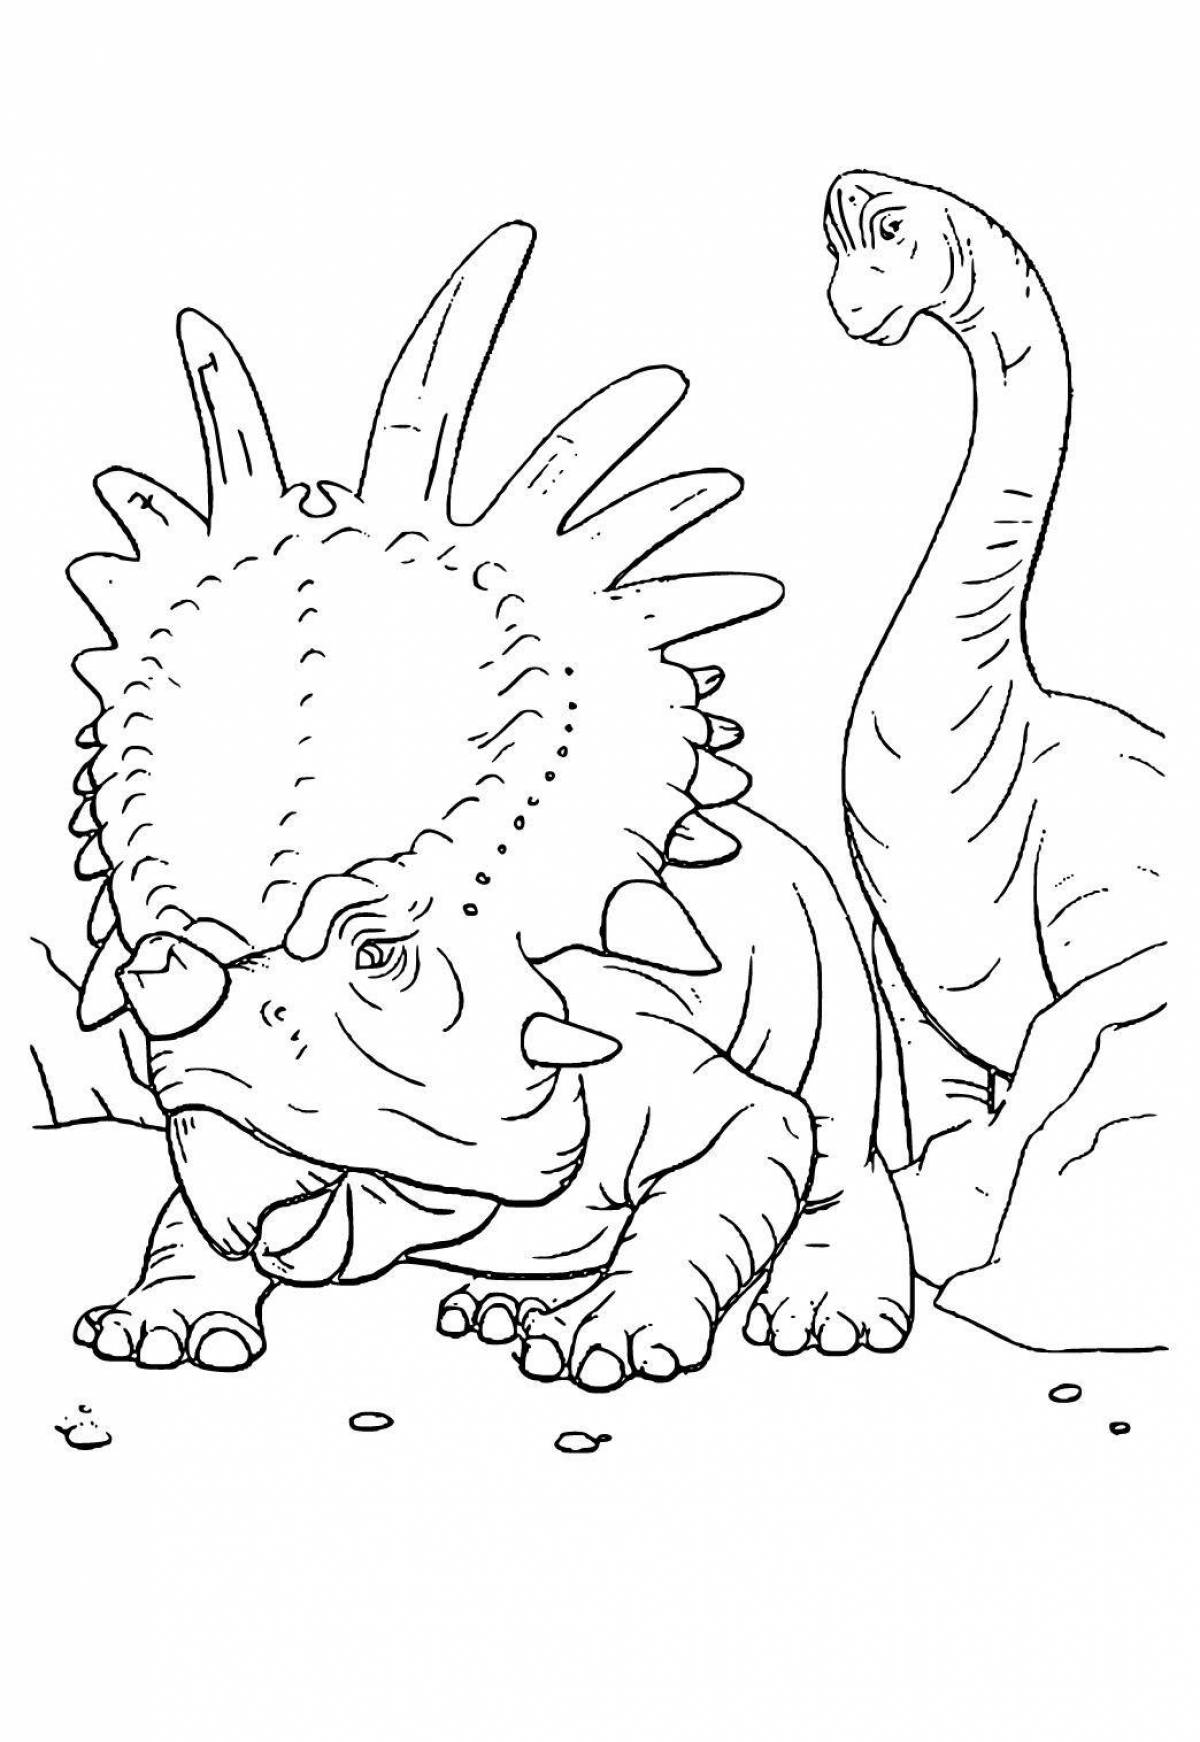 Amazing world of dinosaurs coloring book